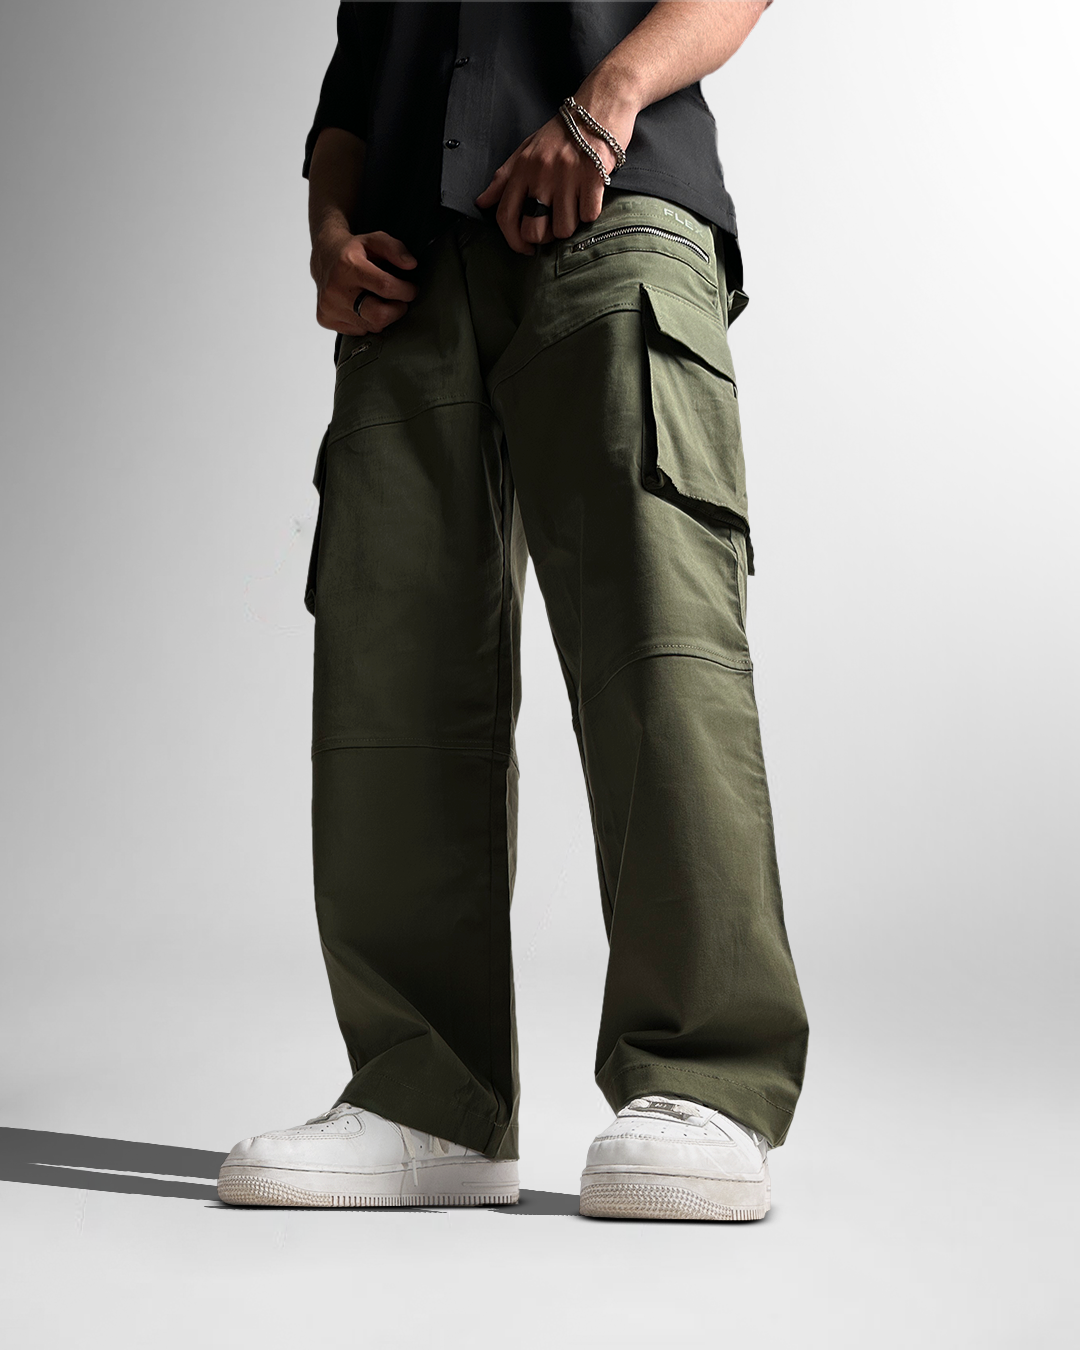 Here's a Peek at J.Crew's Pinteresting November Style Guide | Pants outfit  men, Mens outfits, Green pants outfit